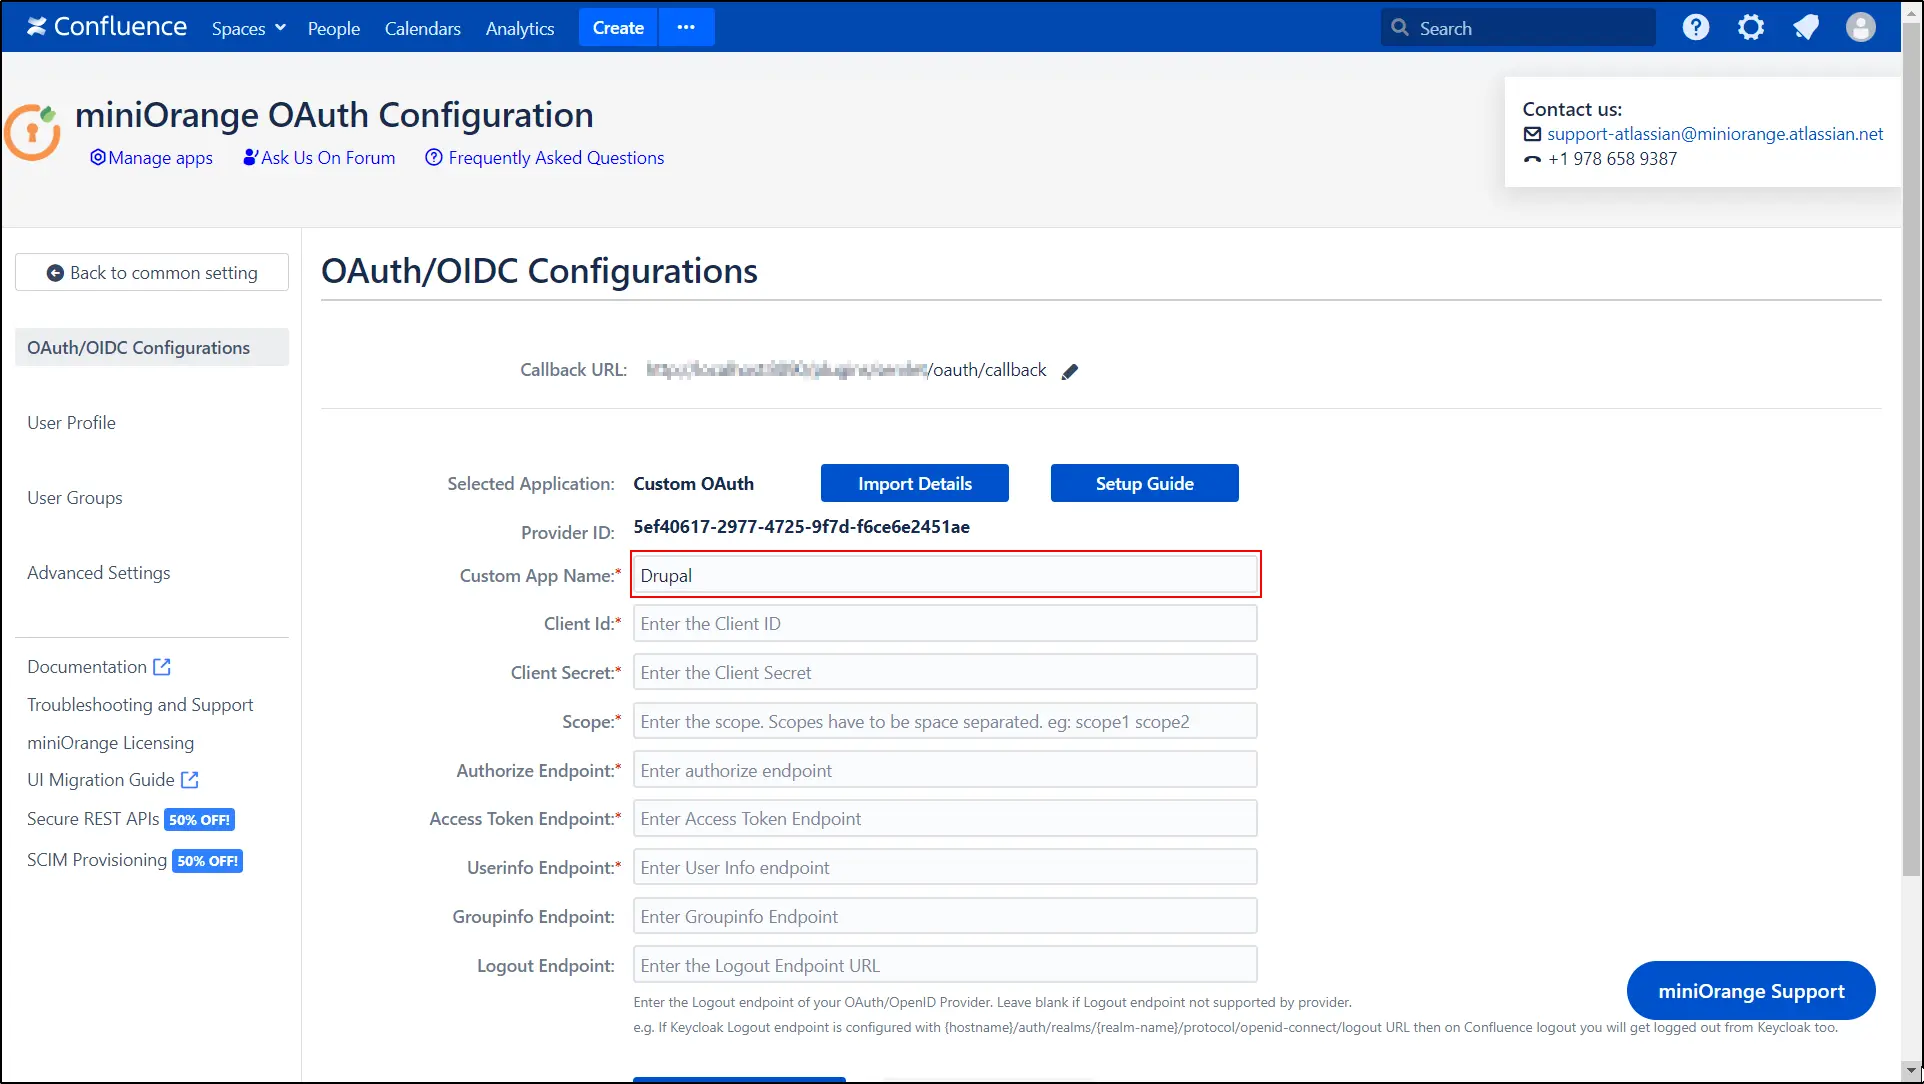  Drupal Confluence OAuth OIDC Provider - Enter Application name